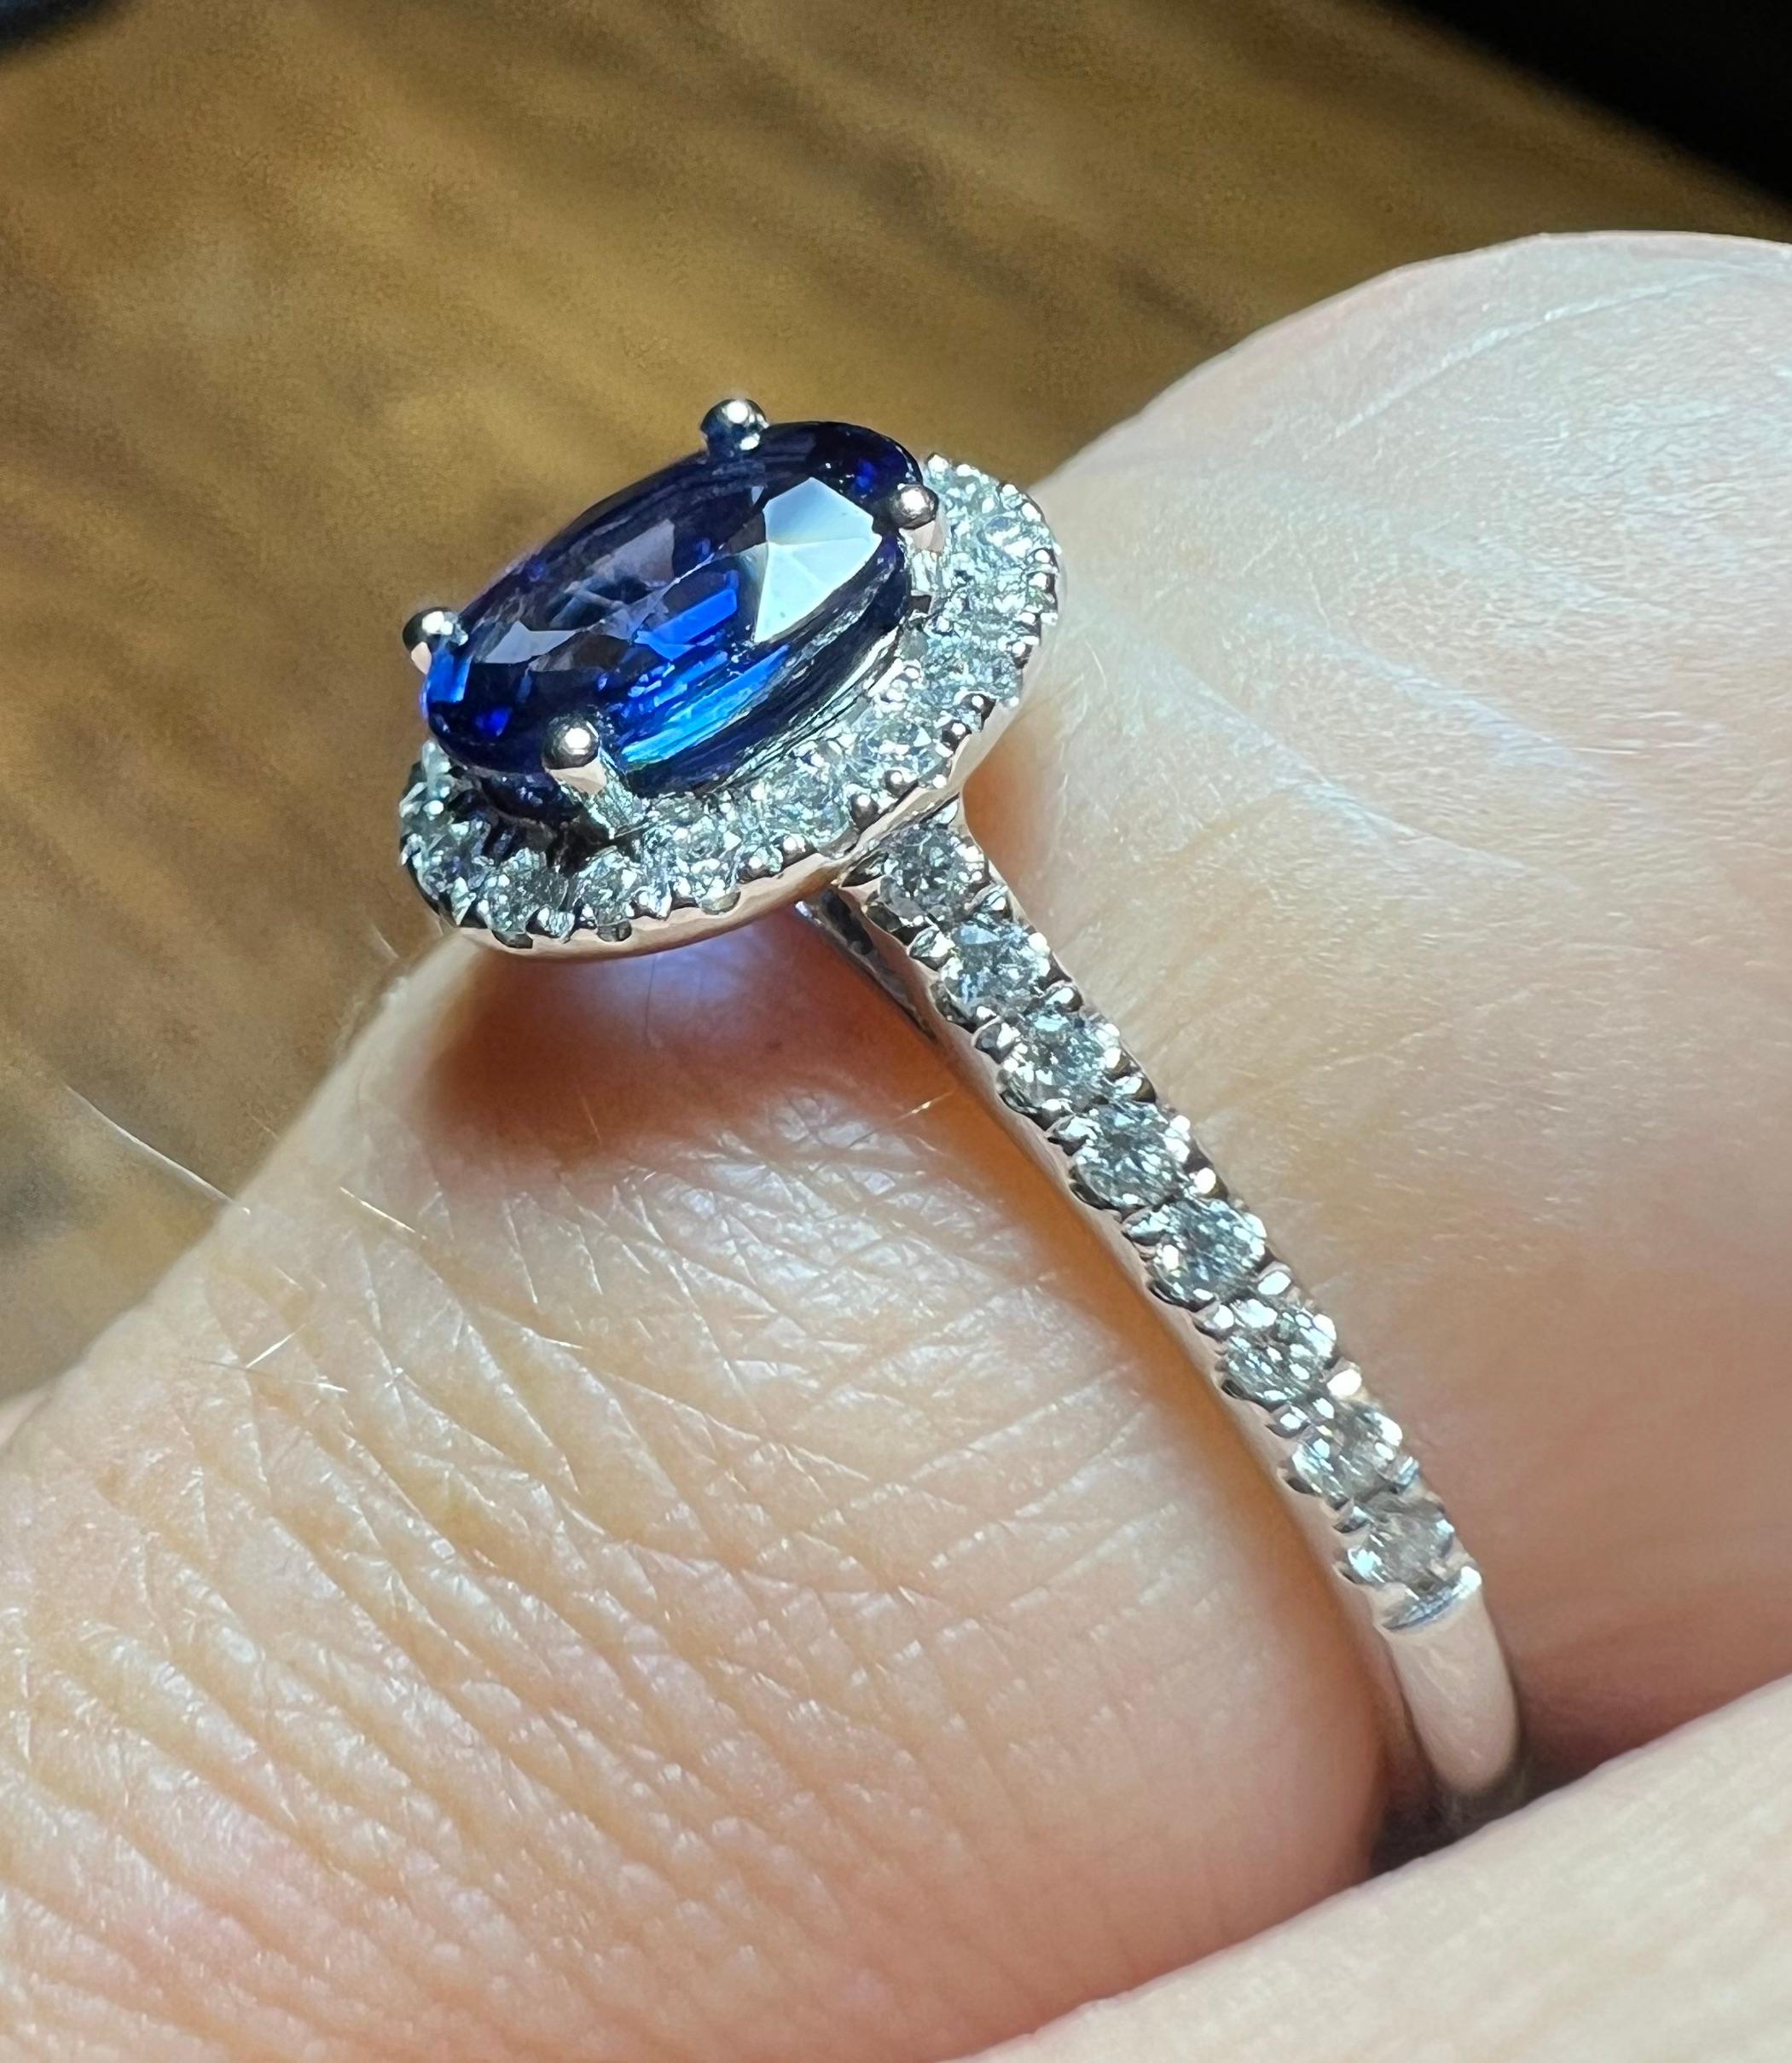 Artisan Ring Set With A Sapphire Surrounded By Diamonds, 18 Carat Gold